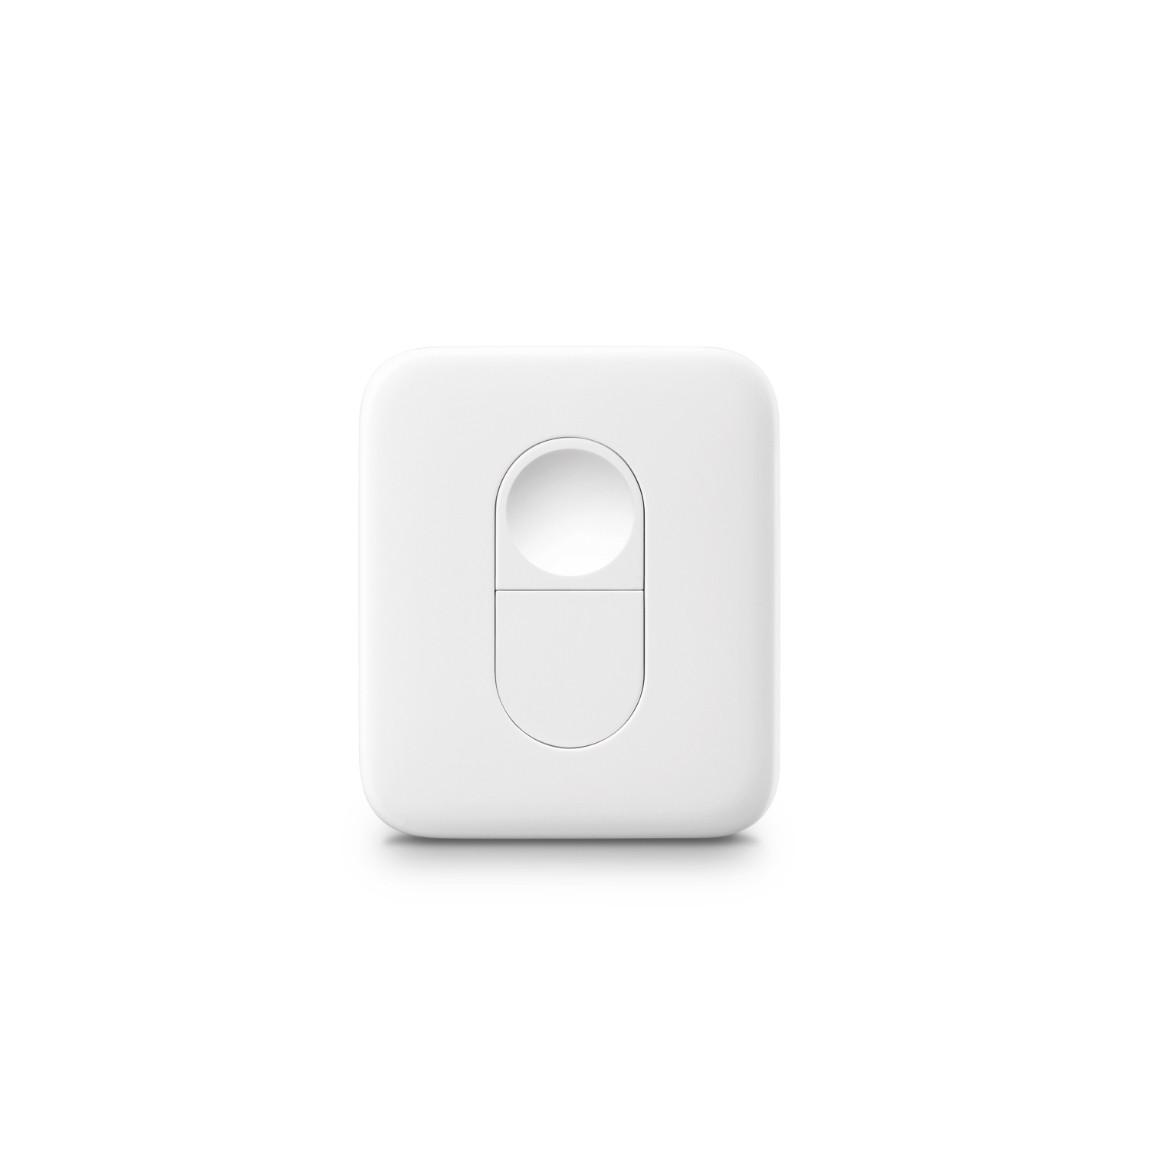 SwitchBot Remote - Smarter Button_frontal